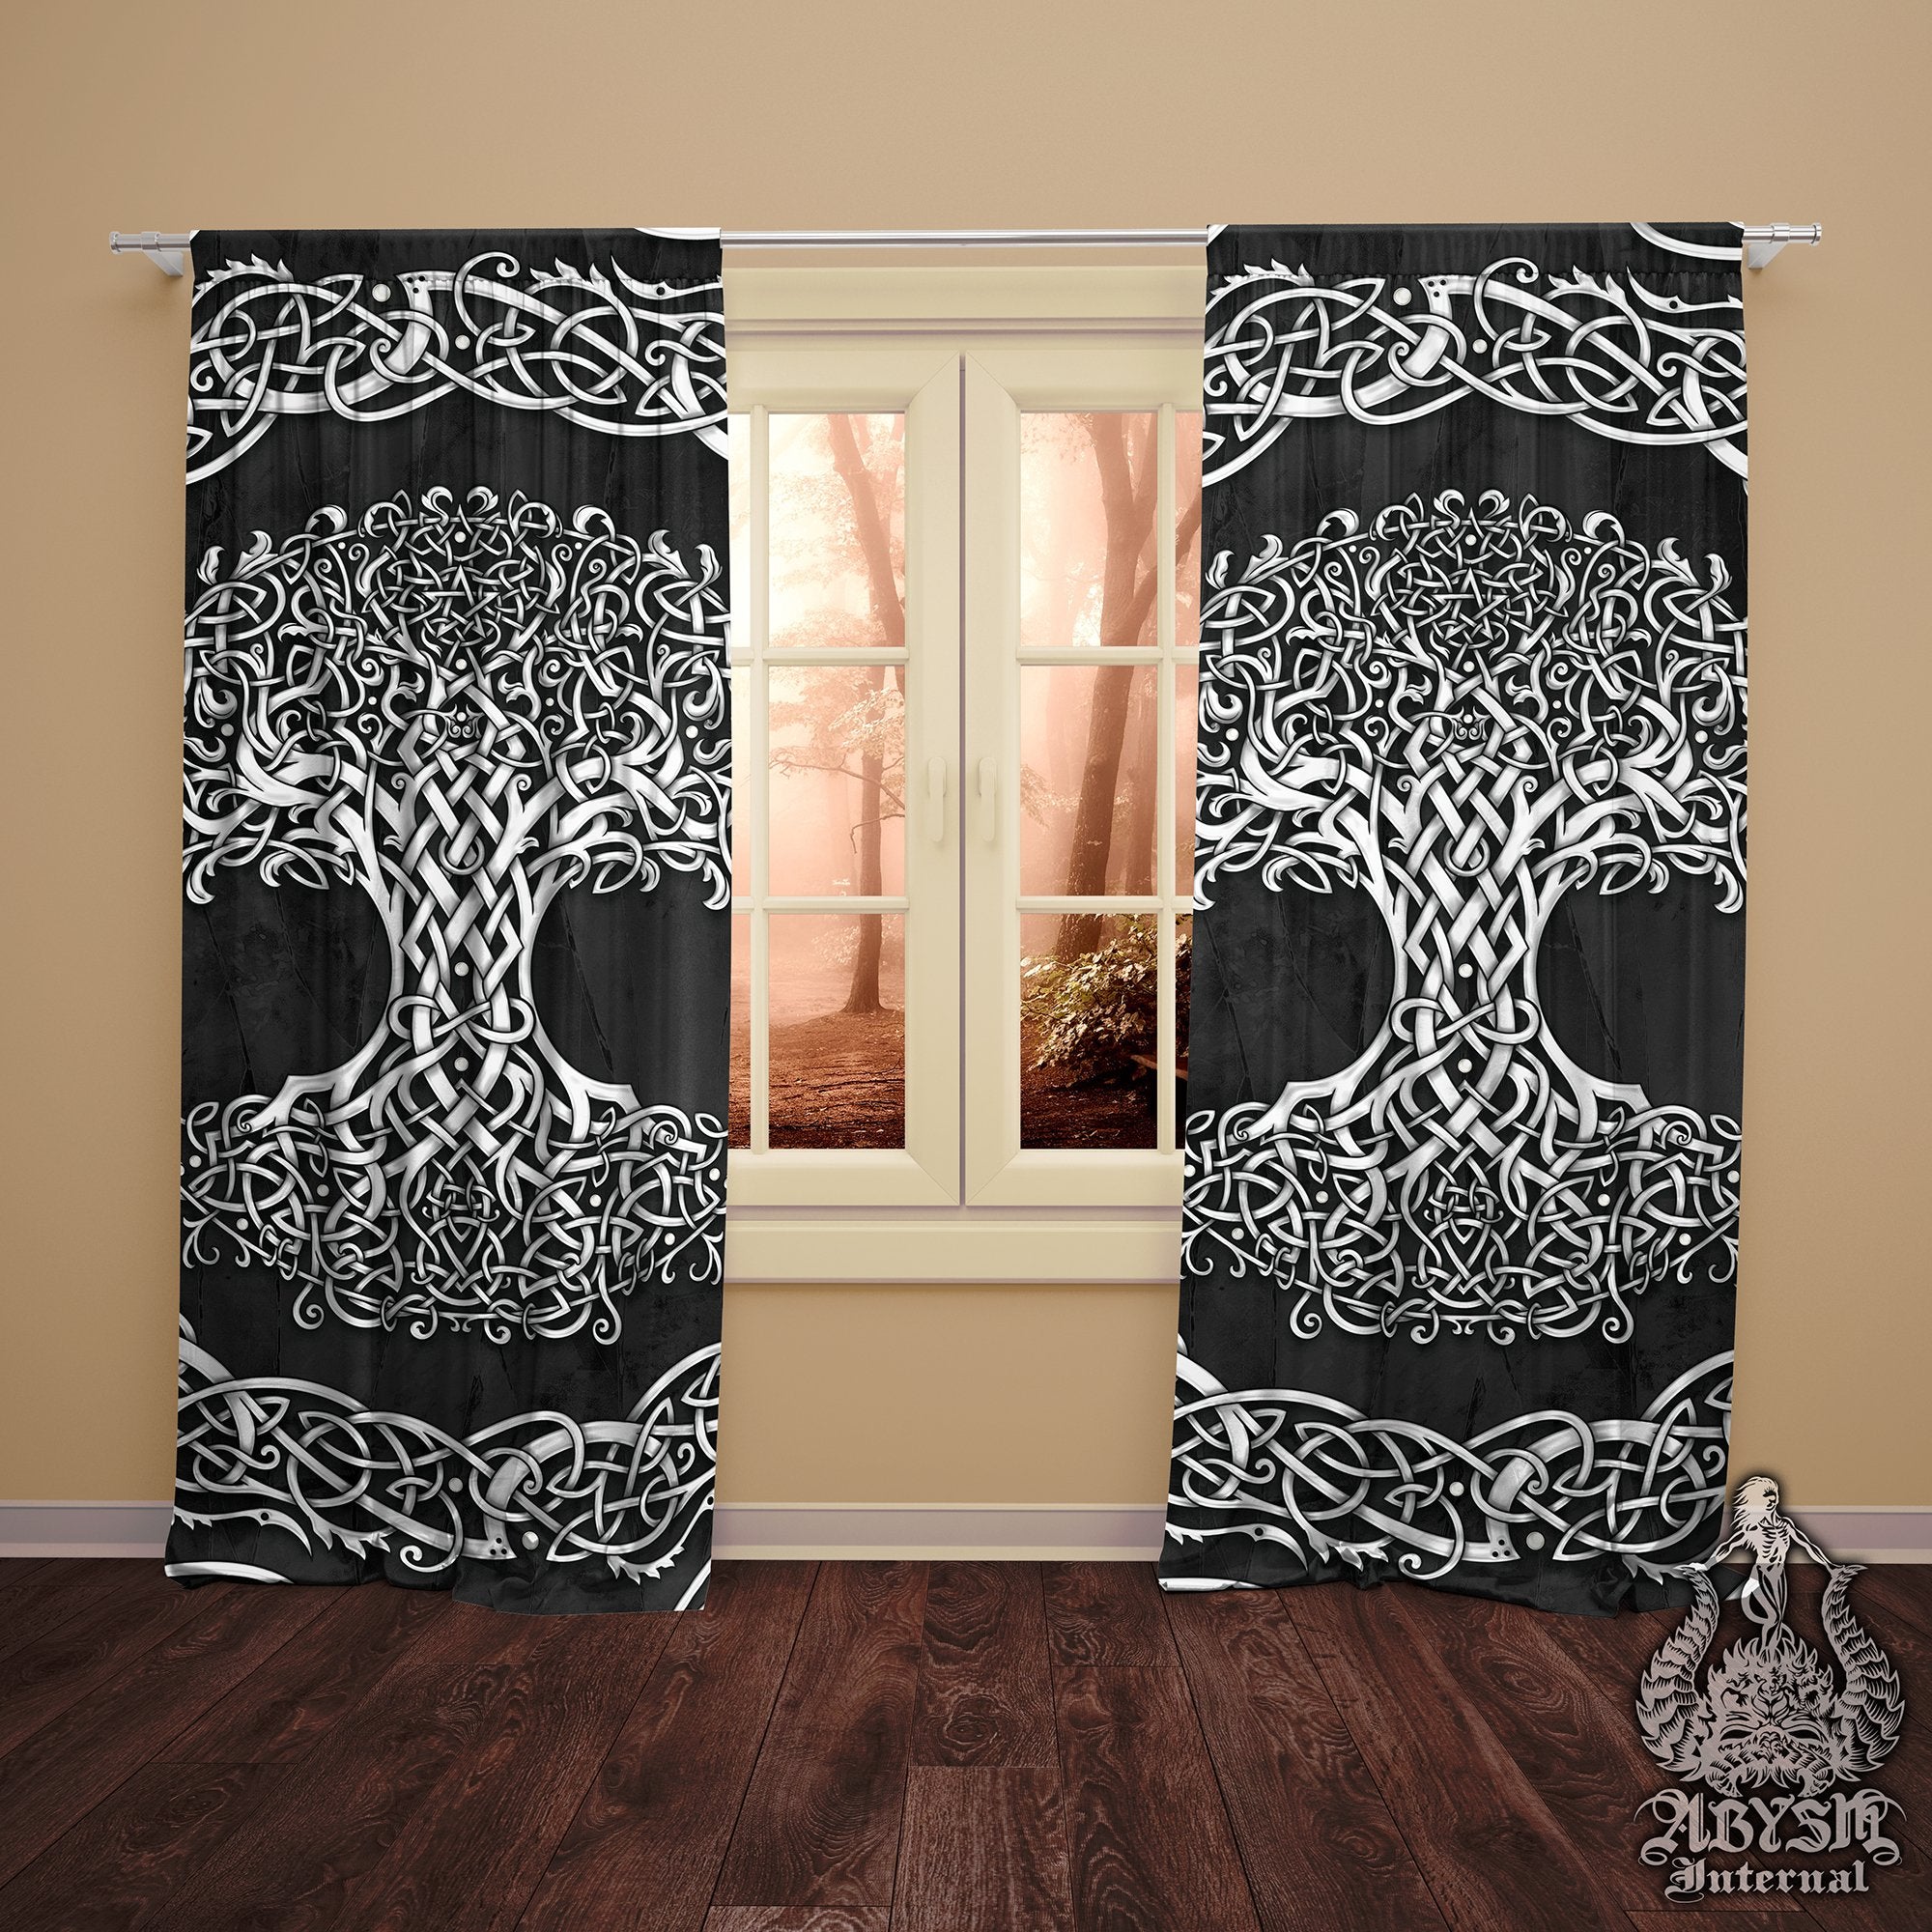 Tree of Life Curtains, 50x84' Printed Window Panels, Celtic Knot, Boho and Wiccan Room Decor, Art Print, Funky and Eclectic Home Decor - White and 3 Colors - Abysm Internal